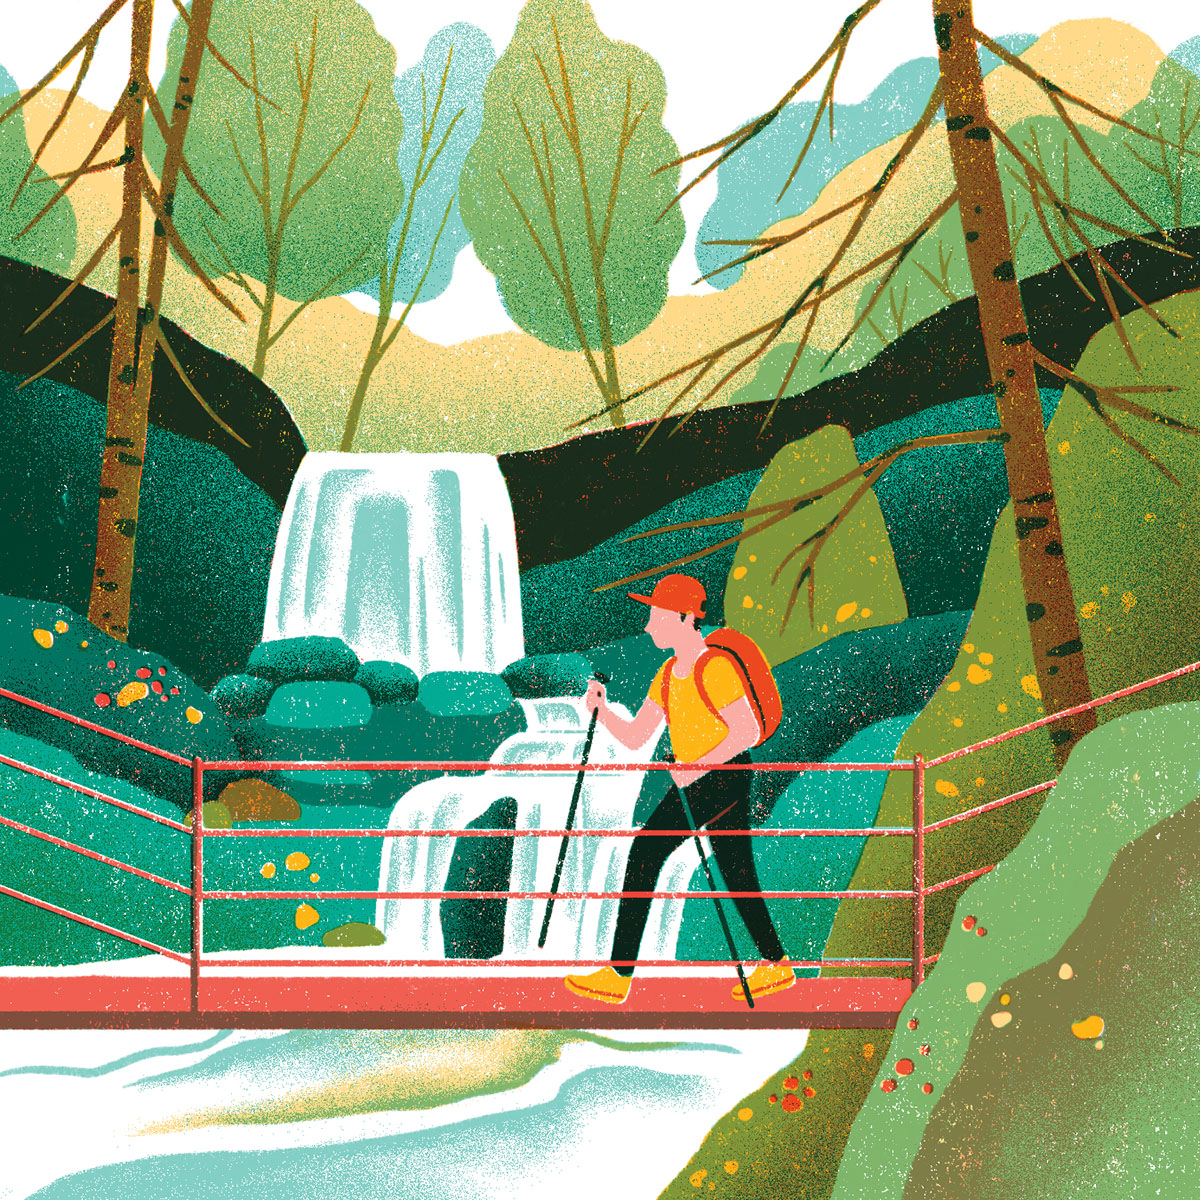 An illustration of a person walking on a bridge over waterfalls